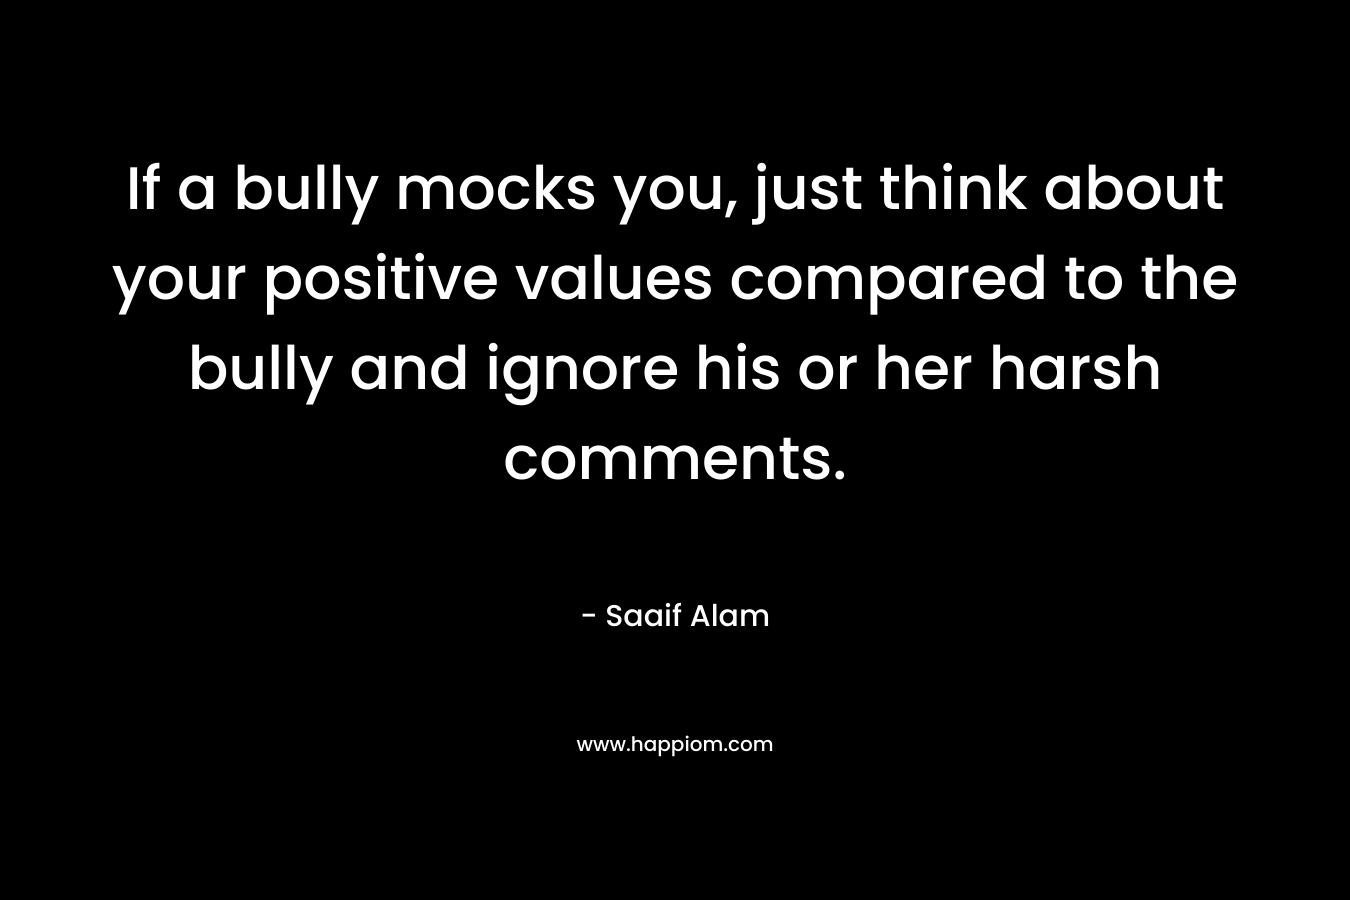 If a bully mocks you, just think about your positive values compared to the bully and ignore his or her harsh comments. – Saaif Alam